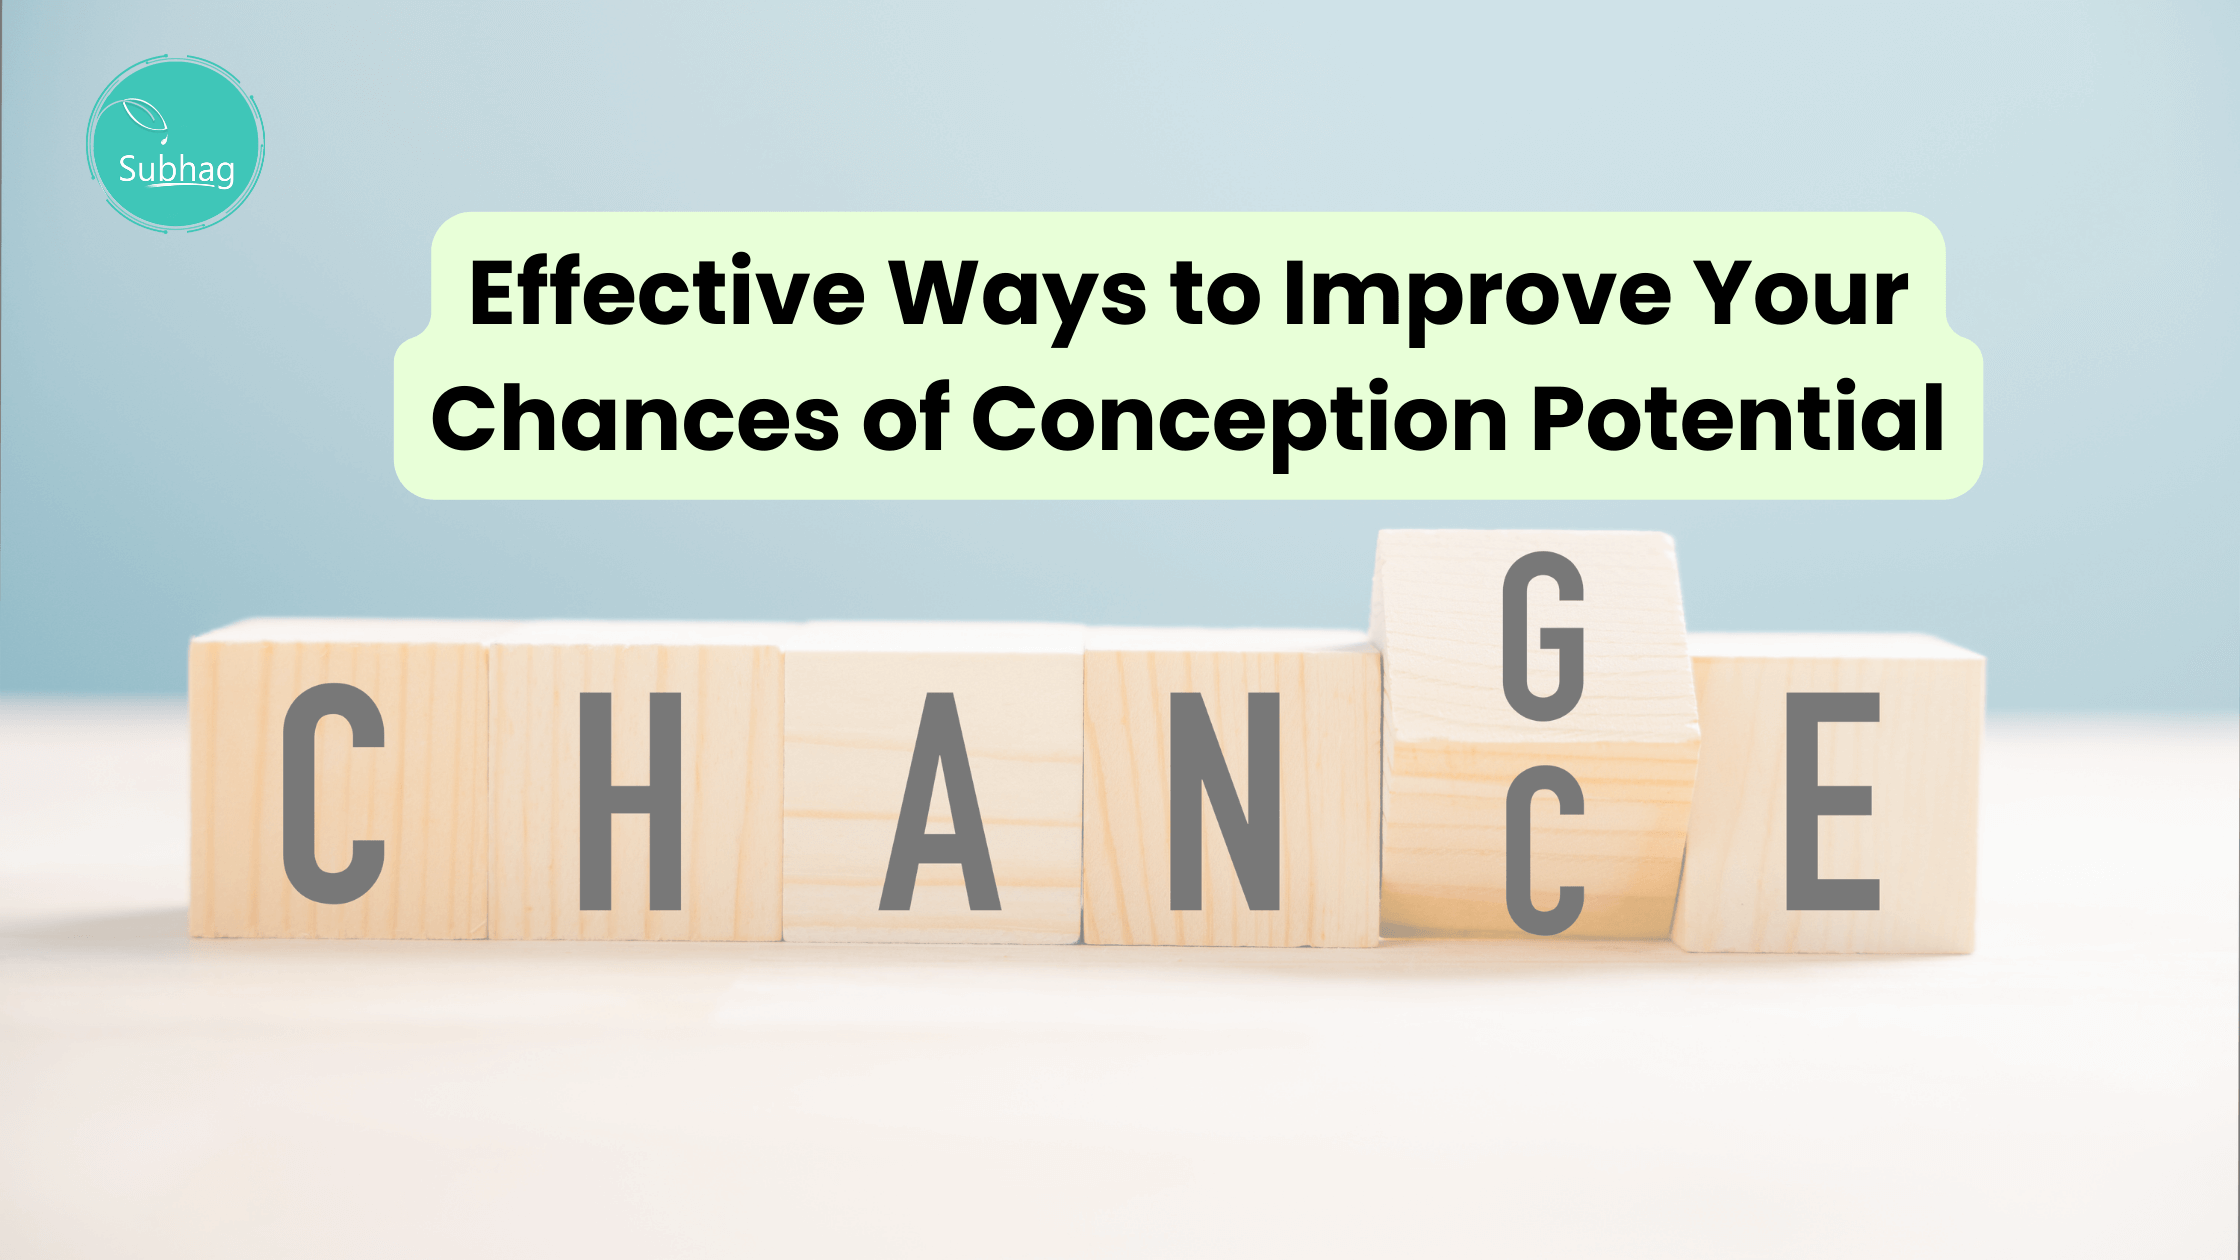 Effective Ways to Improve Your Chances of Conception Potential